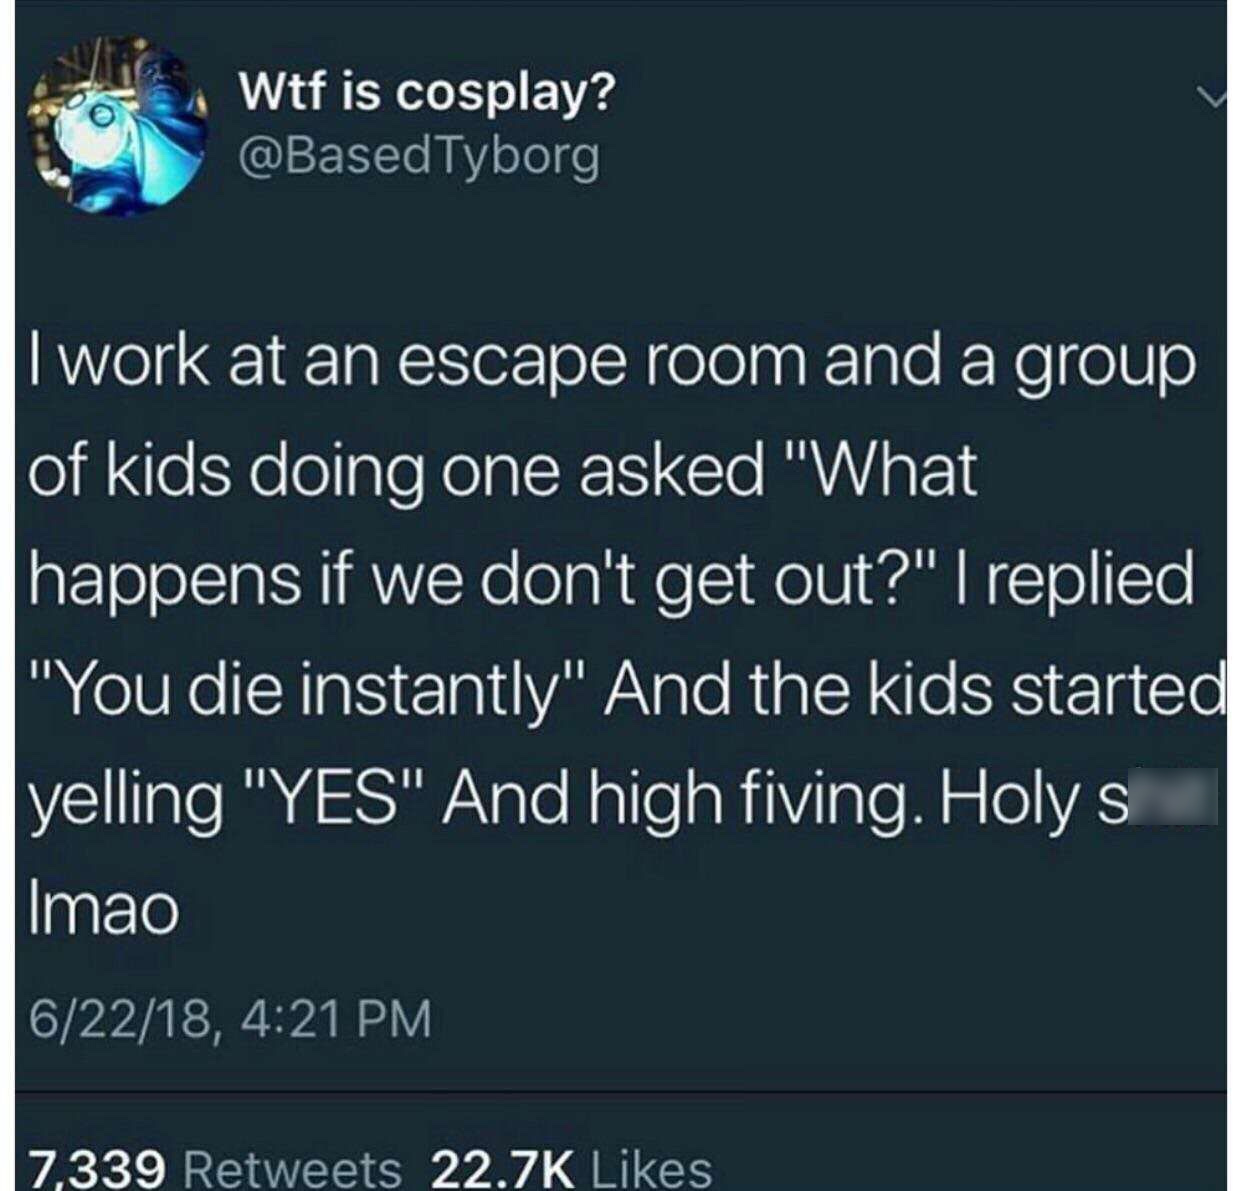 god that a man has - Wtf is cosplay? Tyborg I work at an escape room and a group of kids doing one asked "What happens if we don't get out?" I replied "You die instantly" And the kids started yelling "Yes" And high fiving. Holy s Imao 62218, 2,339